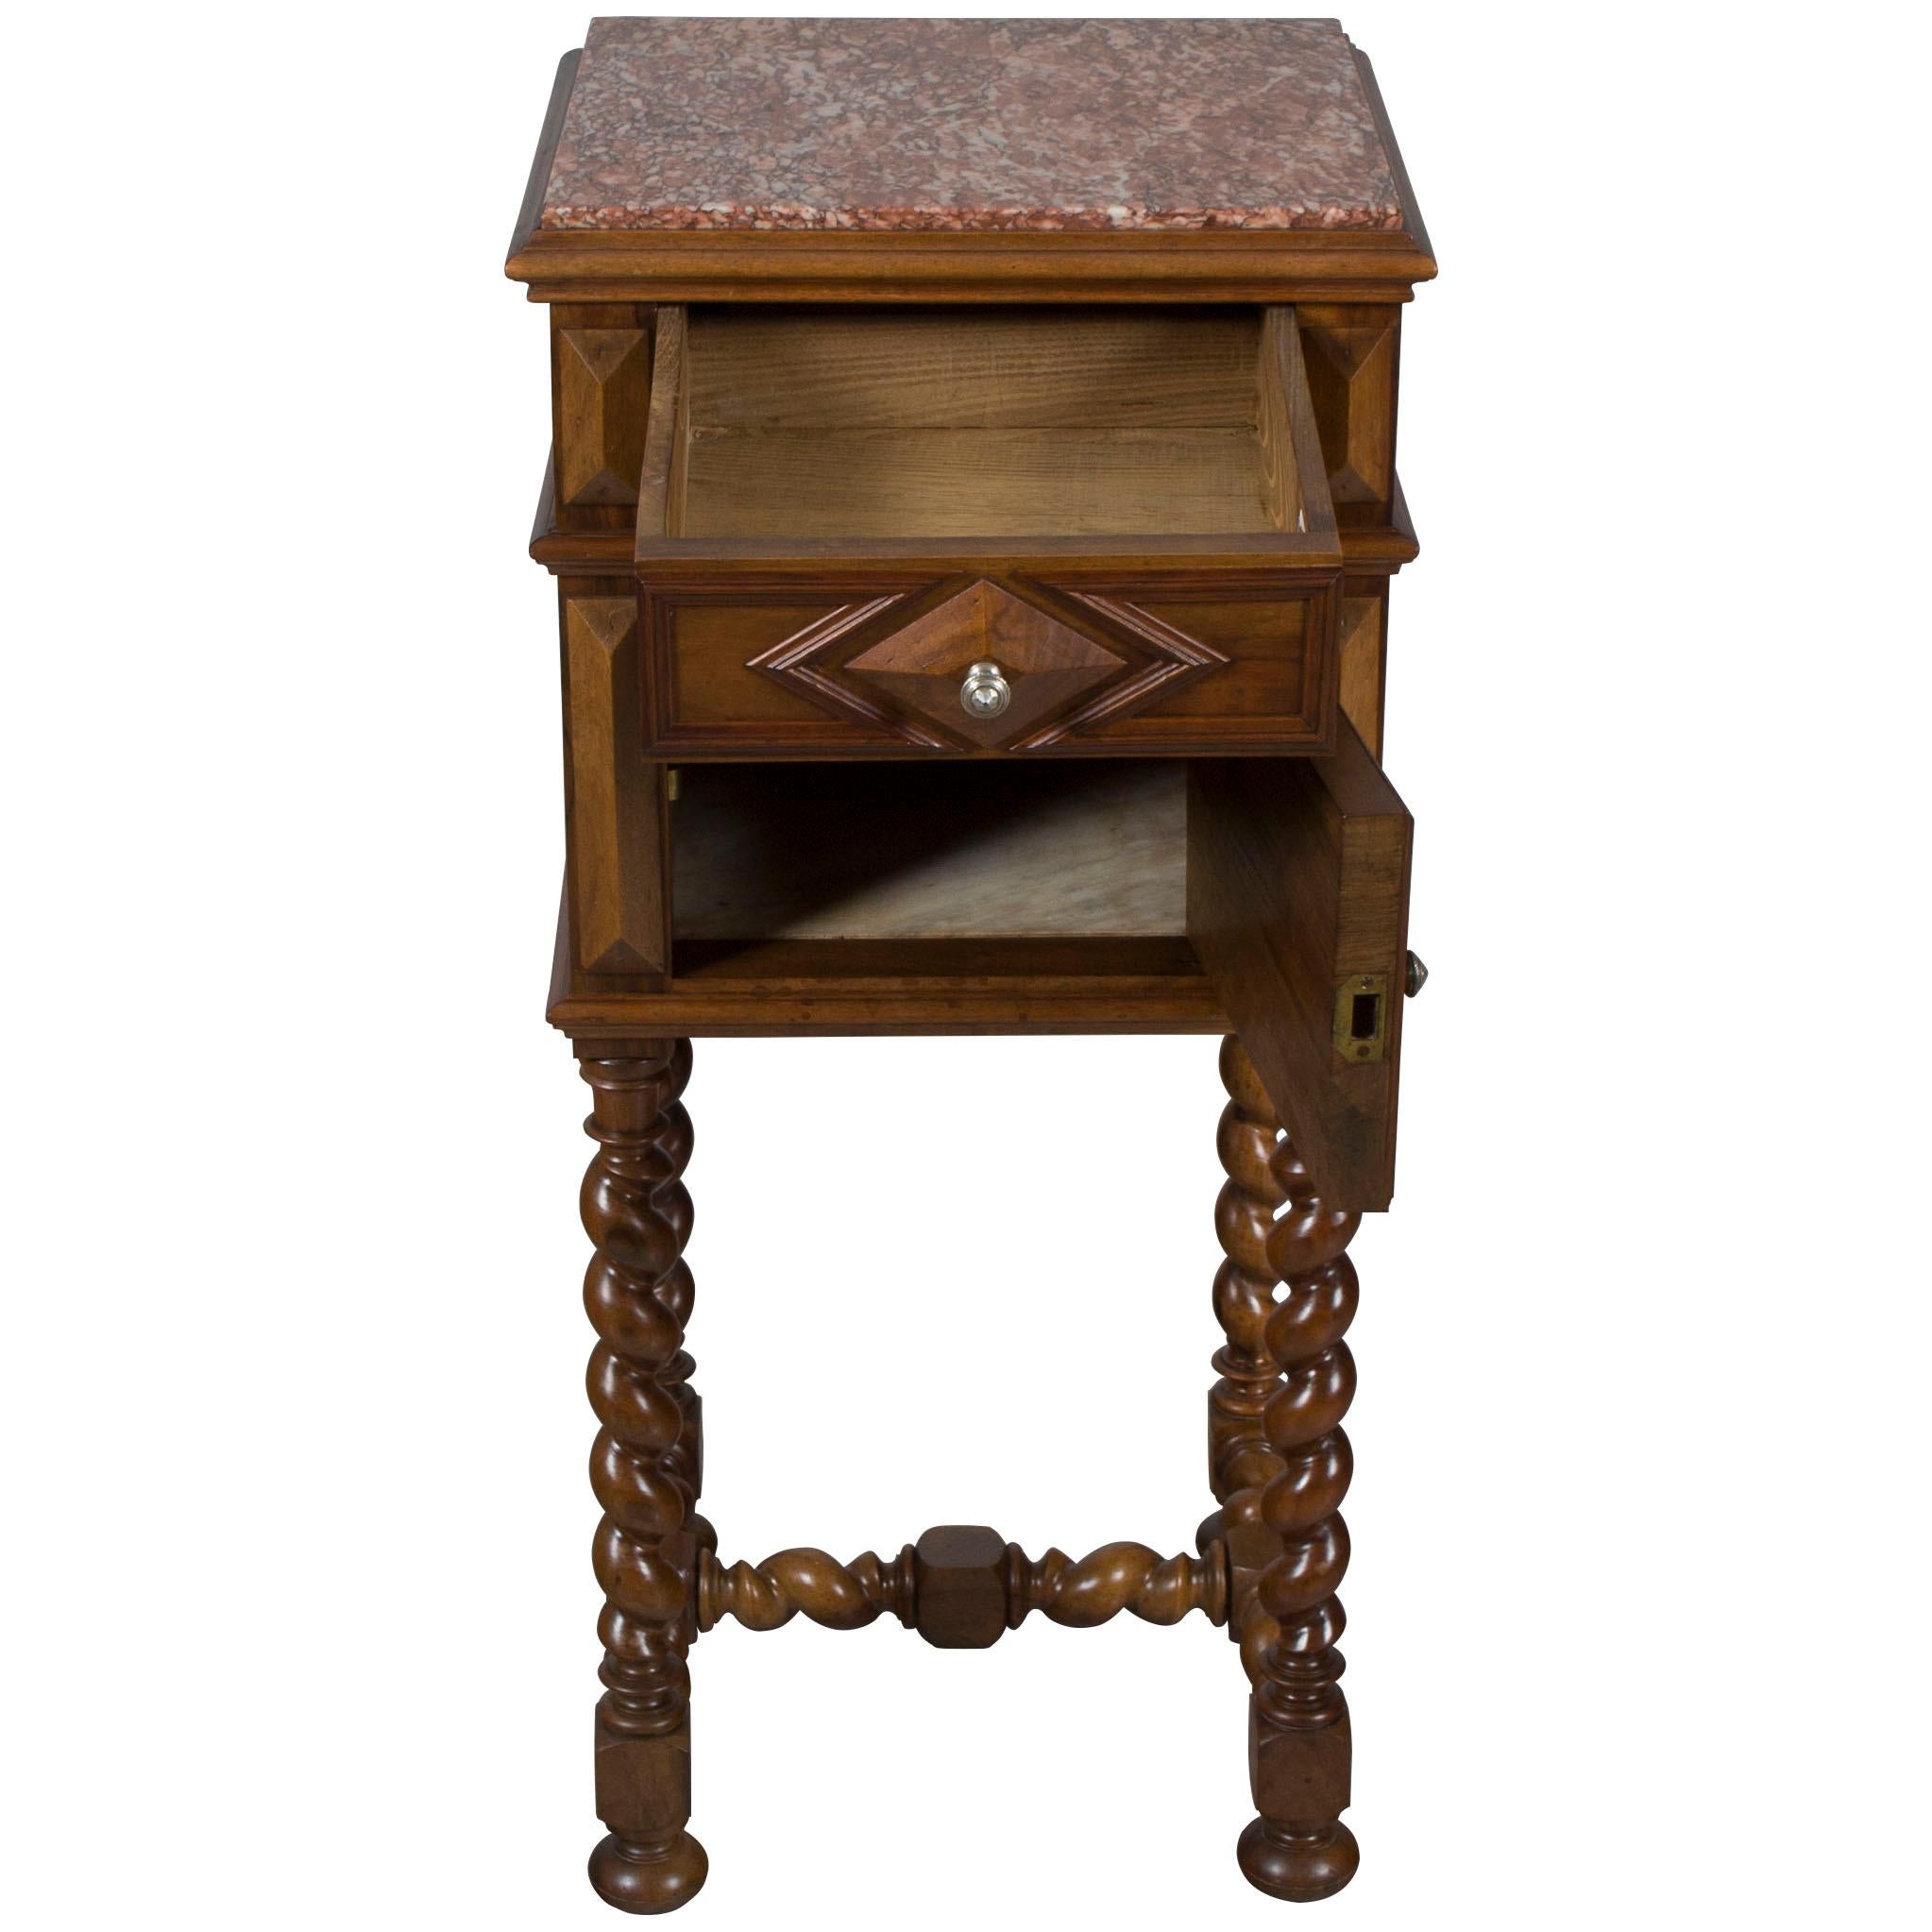 A French classic, this antique pot cupboard is made from walnut wood and probably originated around 1900. Today it is in very good condition and would function very nicely as either a lamp table, nightstand, or end table.

Antique pot cupboards